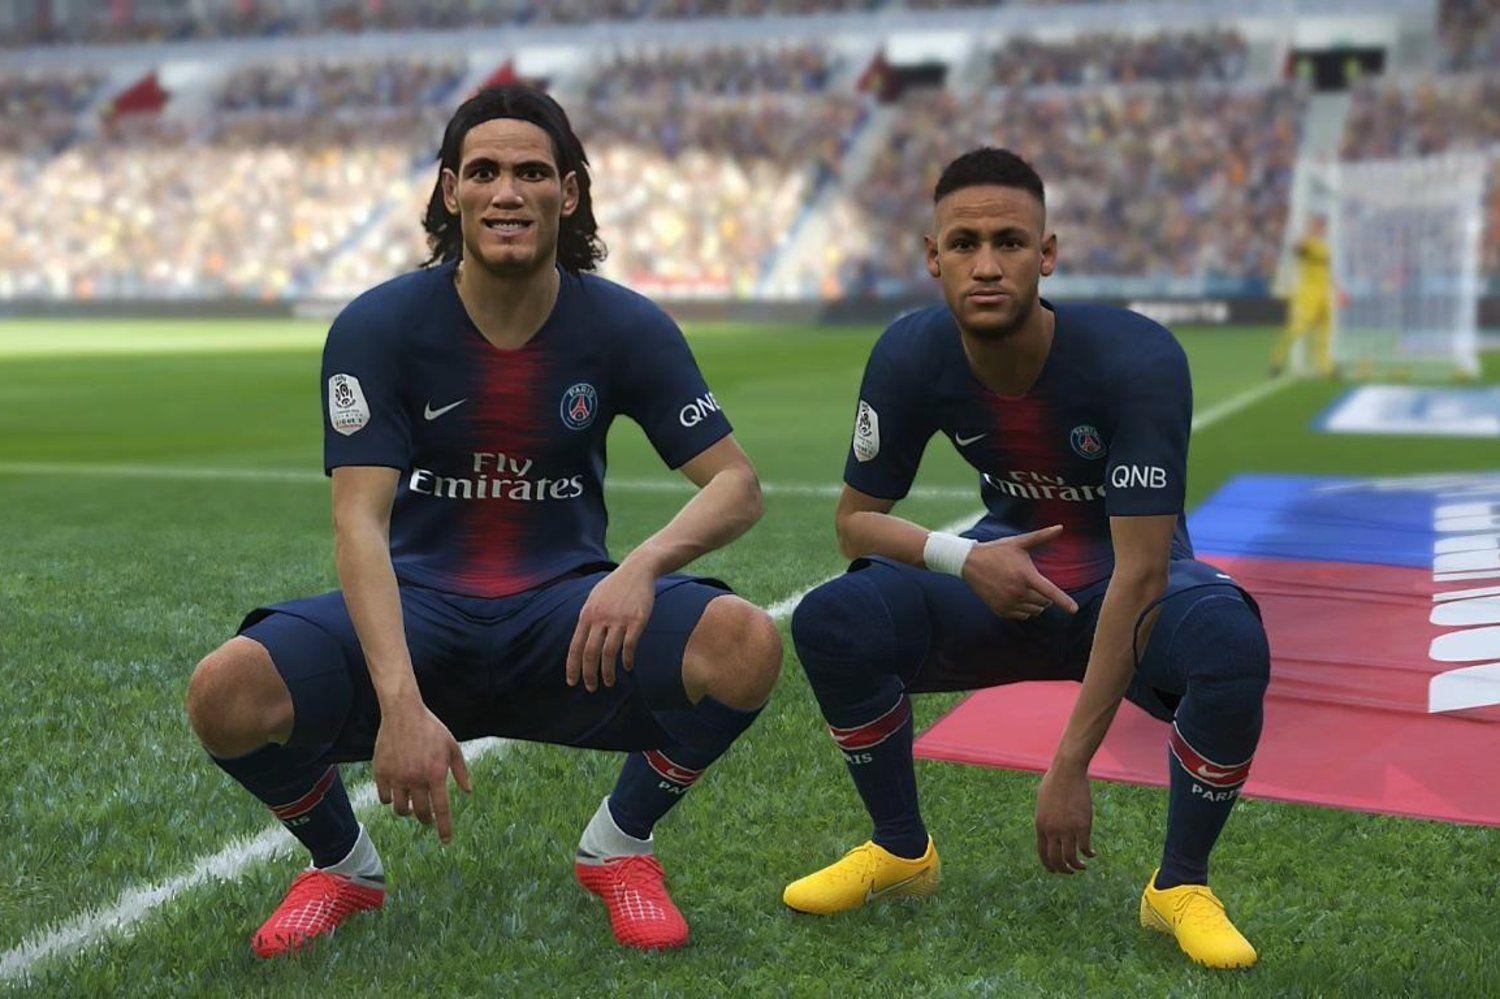 PES 2019 tips: 10 tactics to guide you to victory